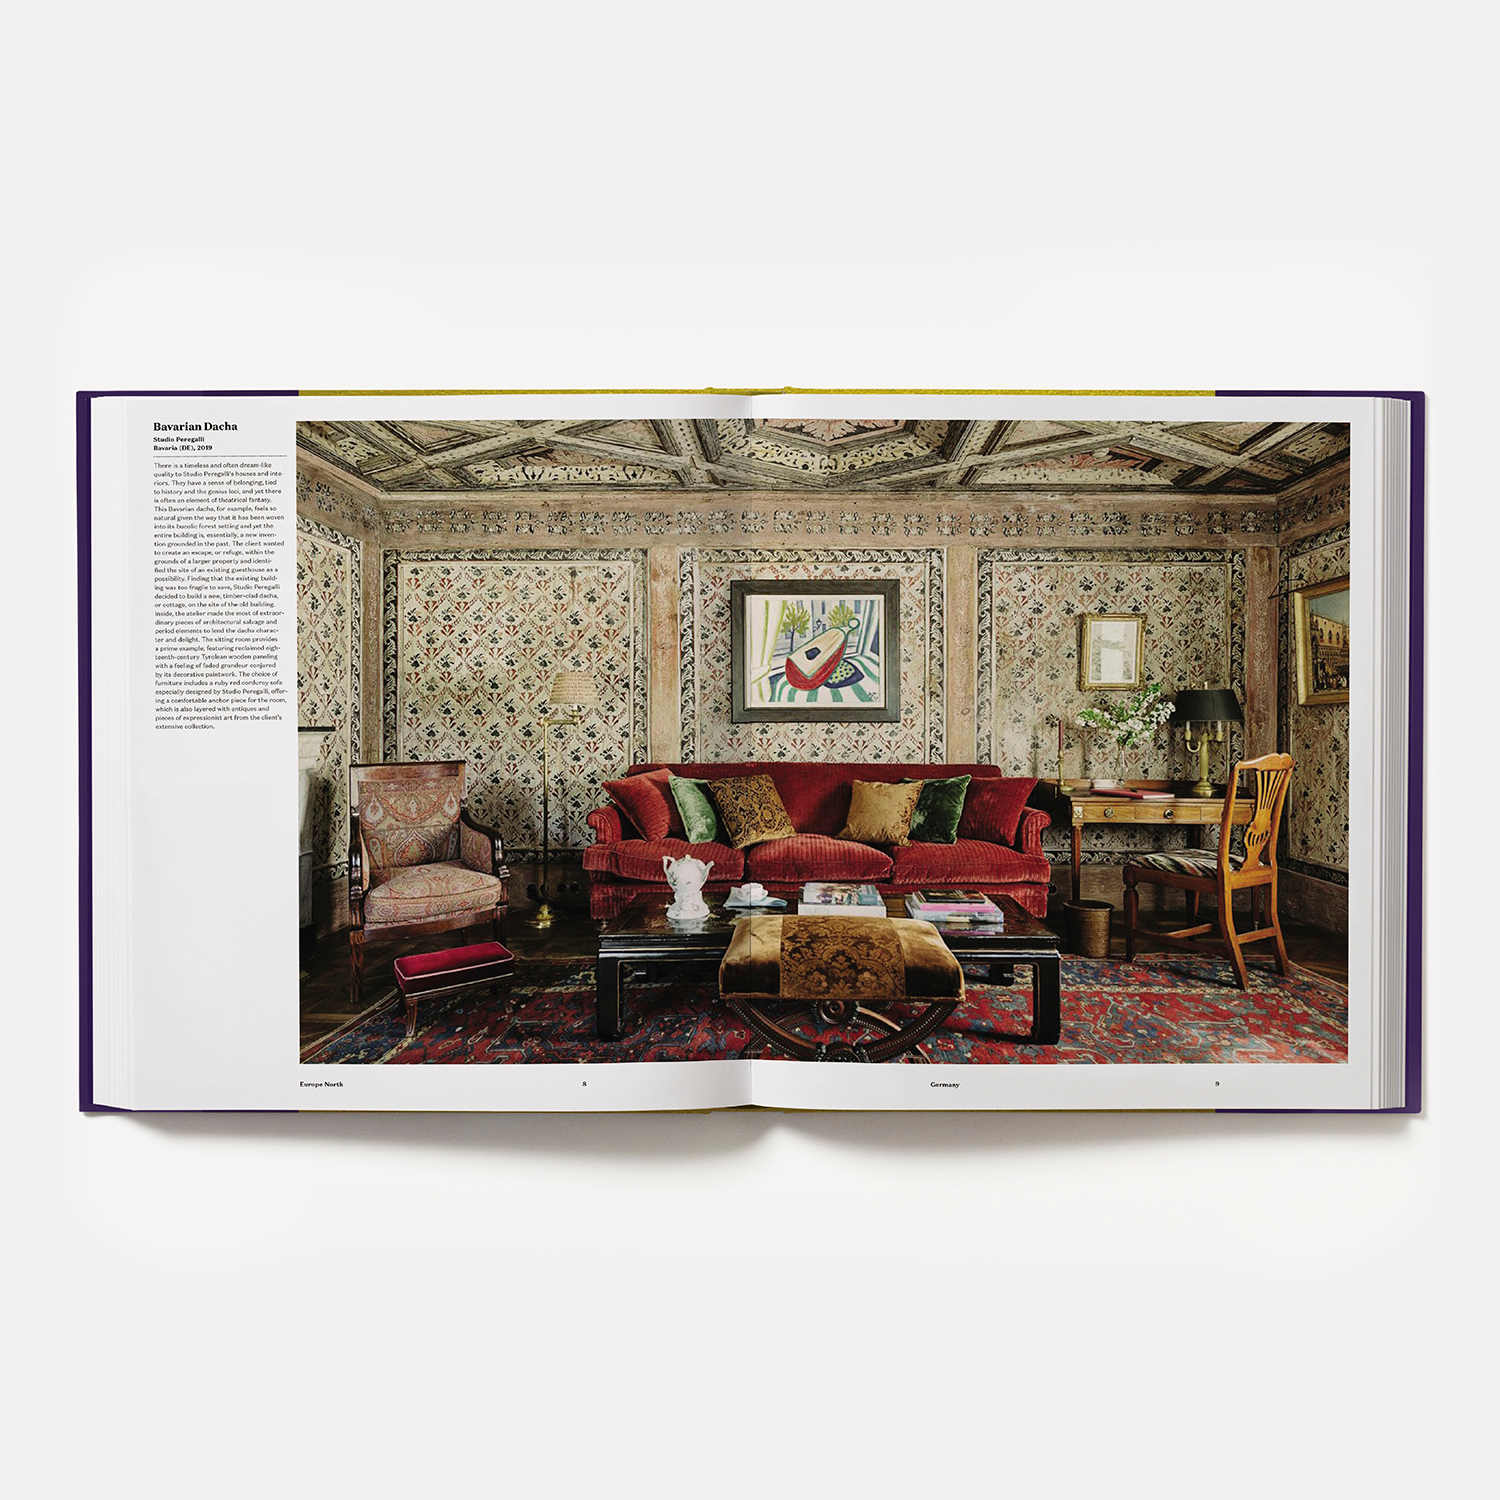 Pages from the Atlas of Interior Design